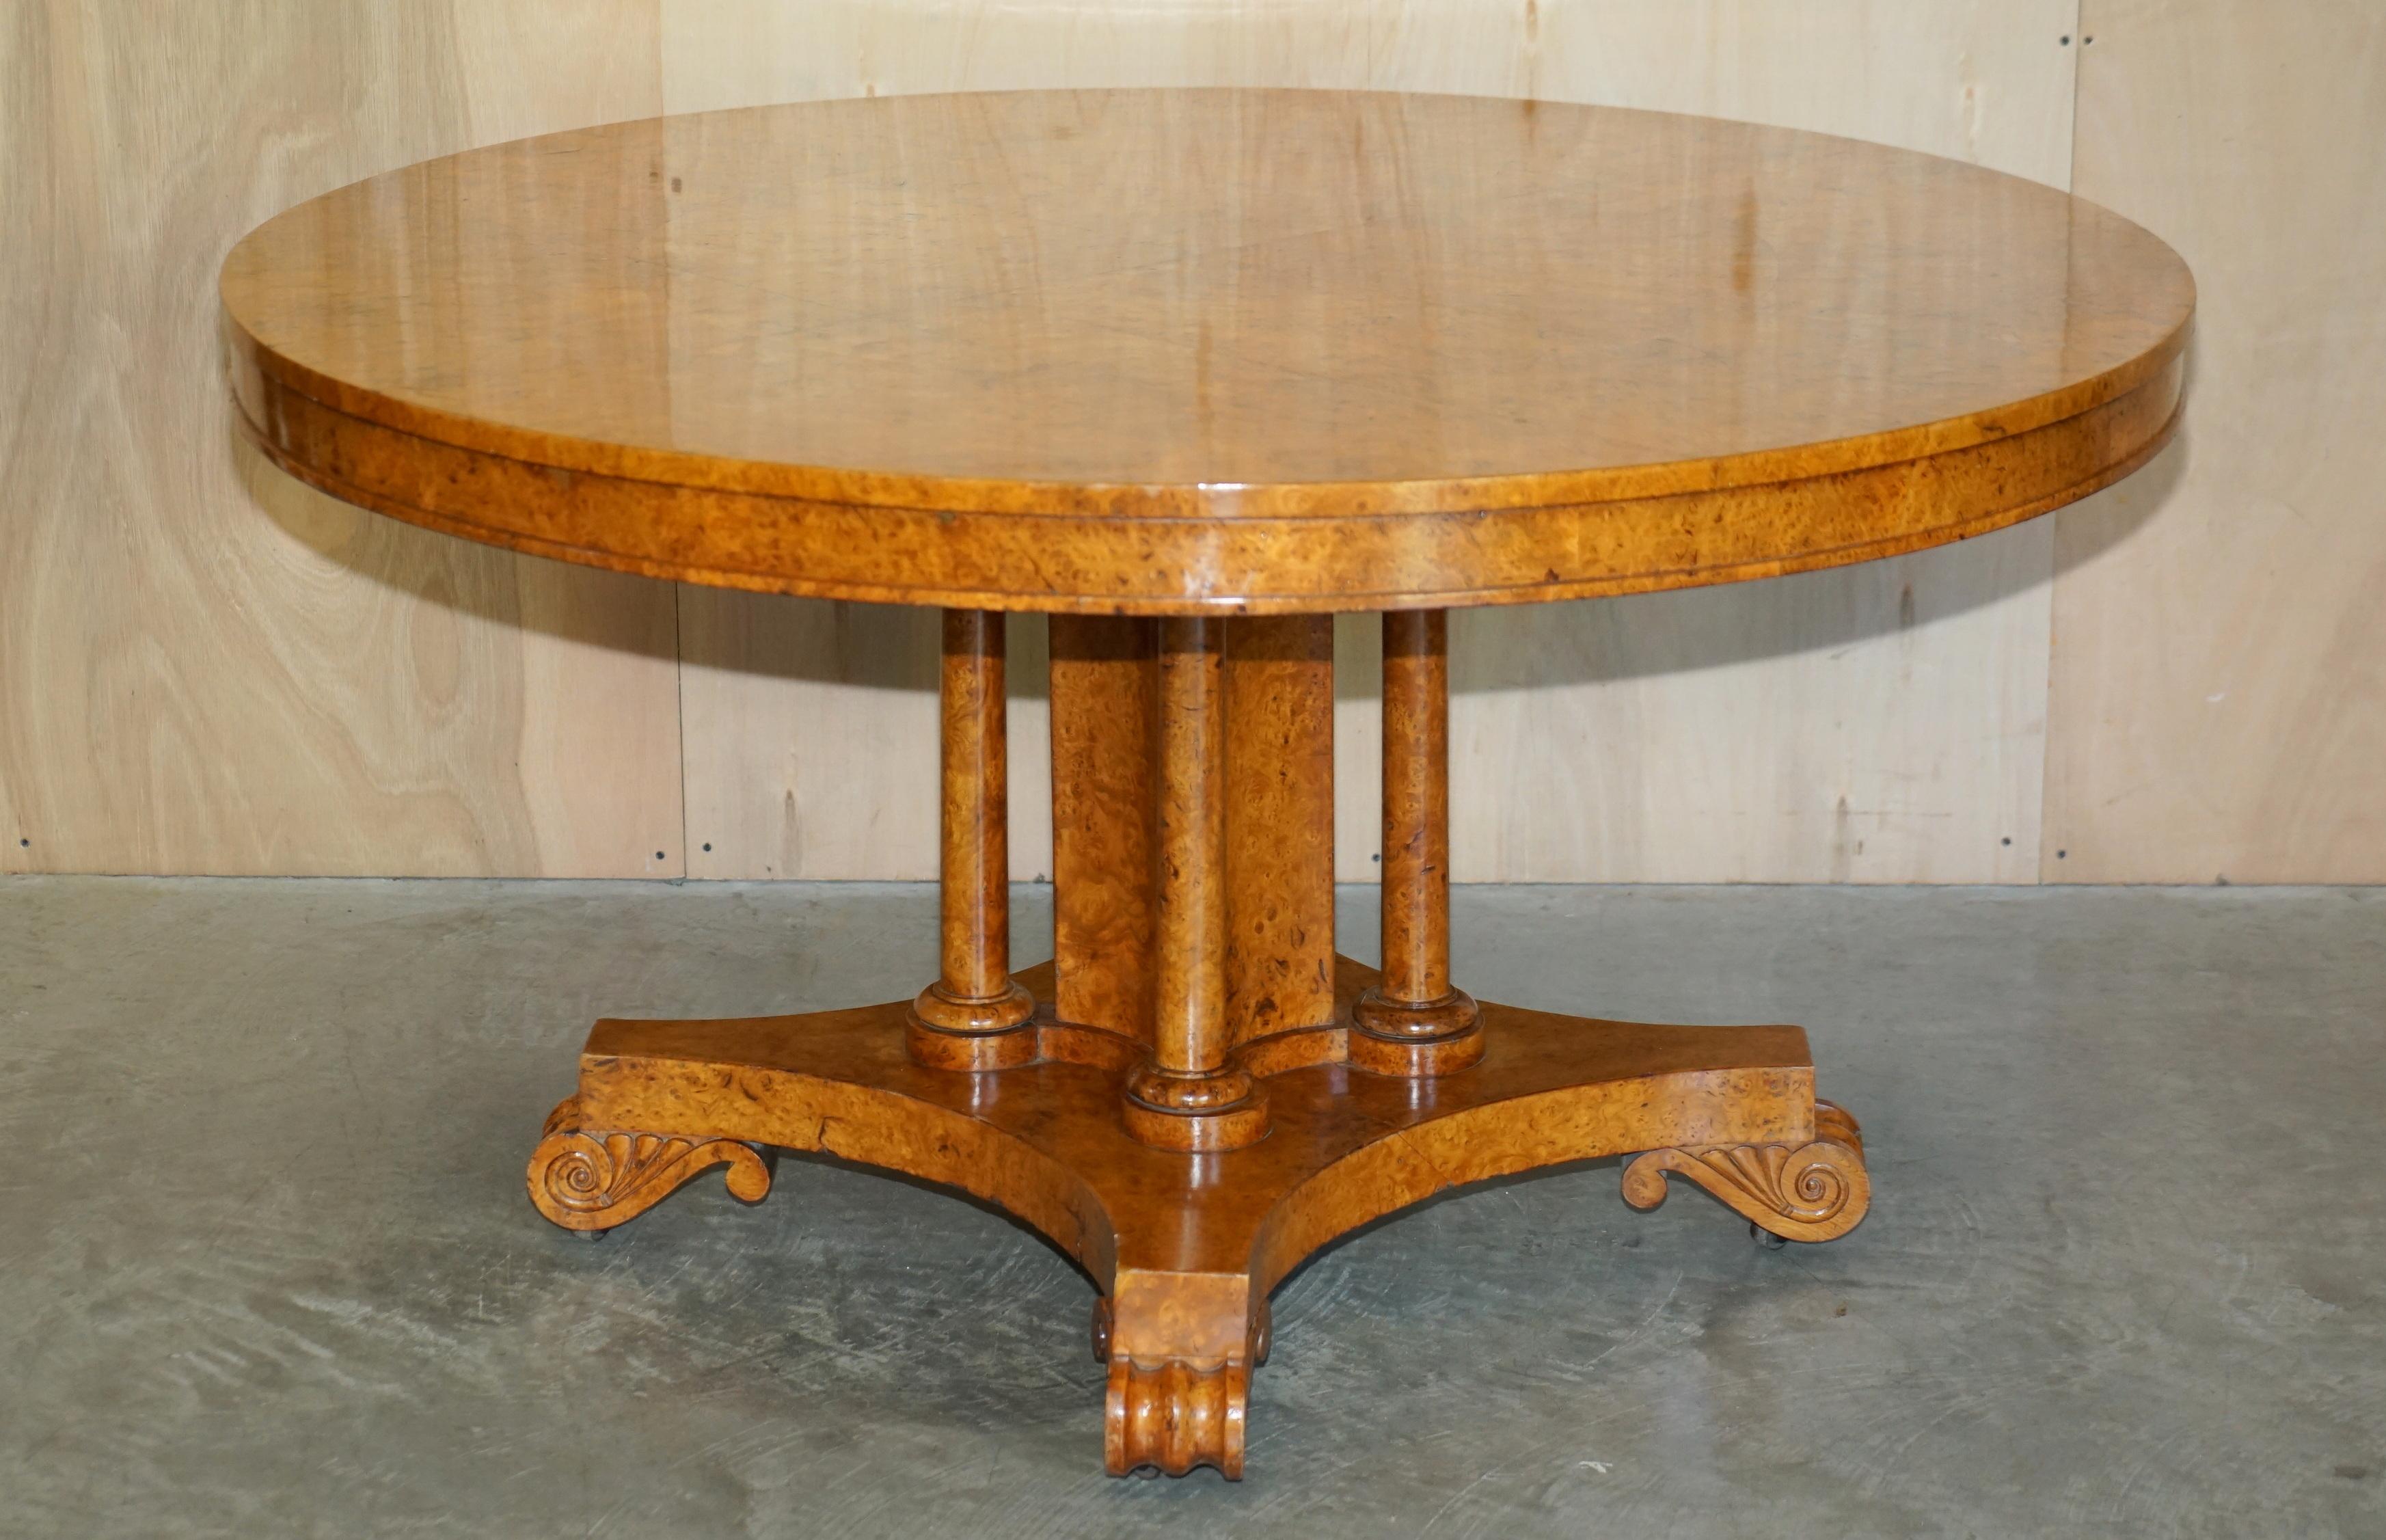 We are delighted to offer for sale this exquisite Victorian Burr Walnut tilt top dining table with sublime pedestal column base

A good looking and well made table, ideally suited as a four person dining table or as a large occasional / centre